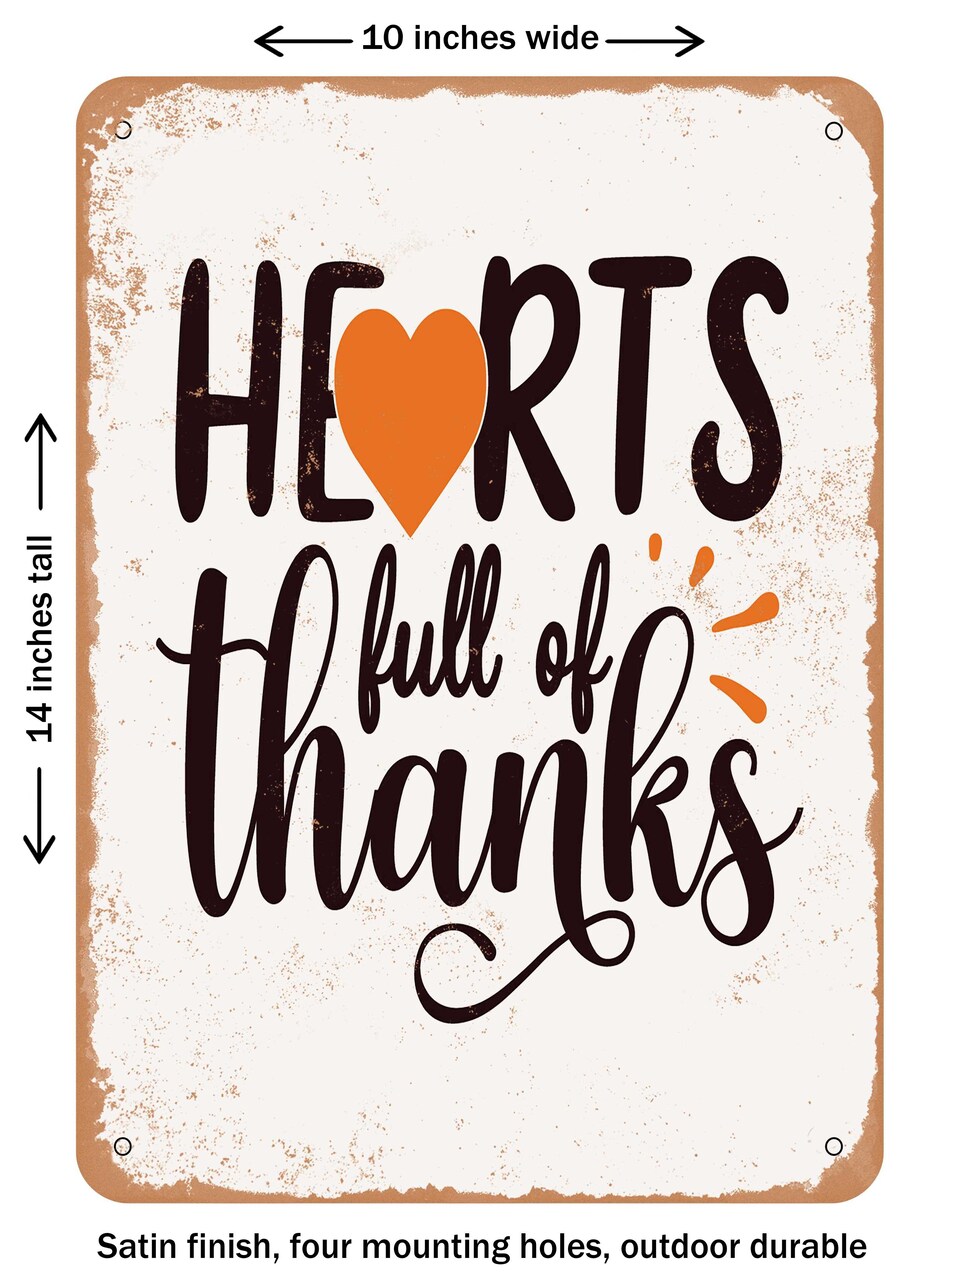 DECORATIVE METAL SIGN - Hearts Full of Thanks - 2  - Vintage Rusty Look